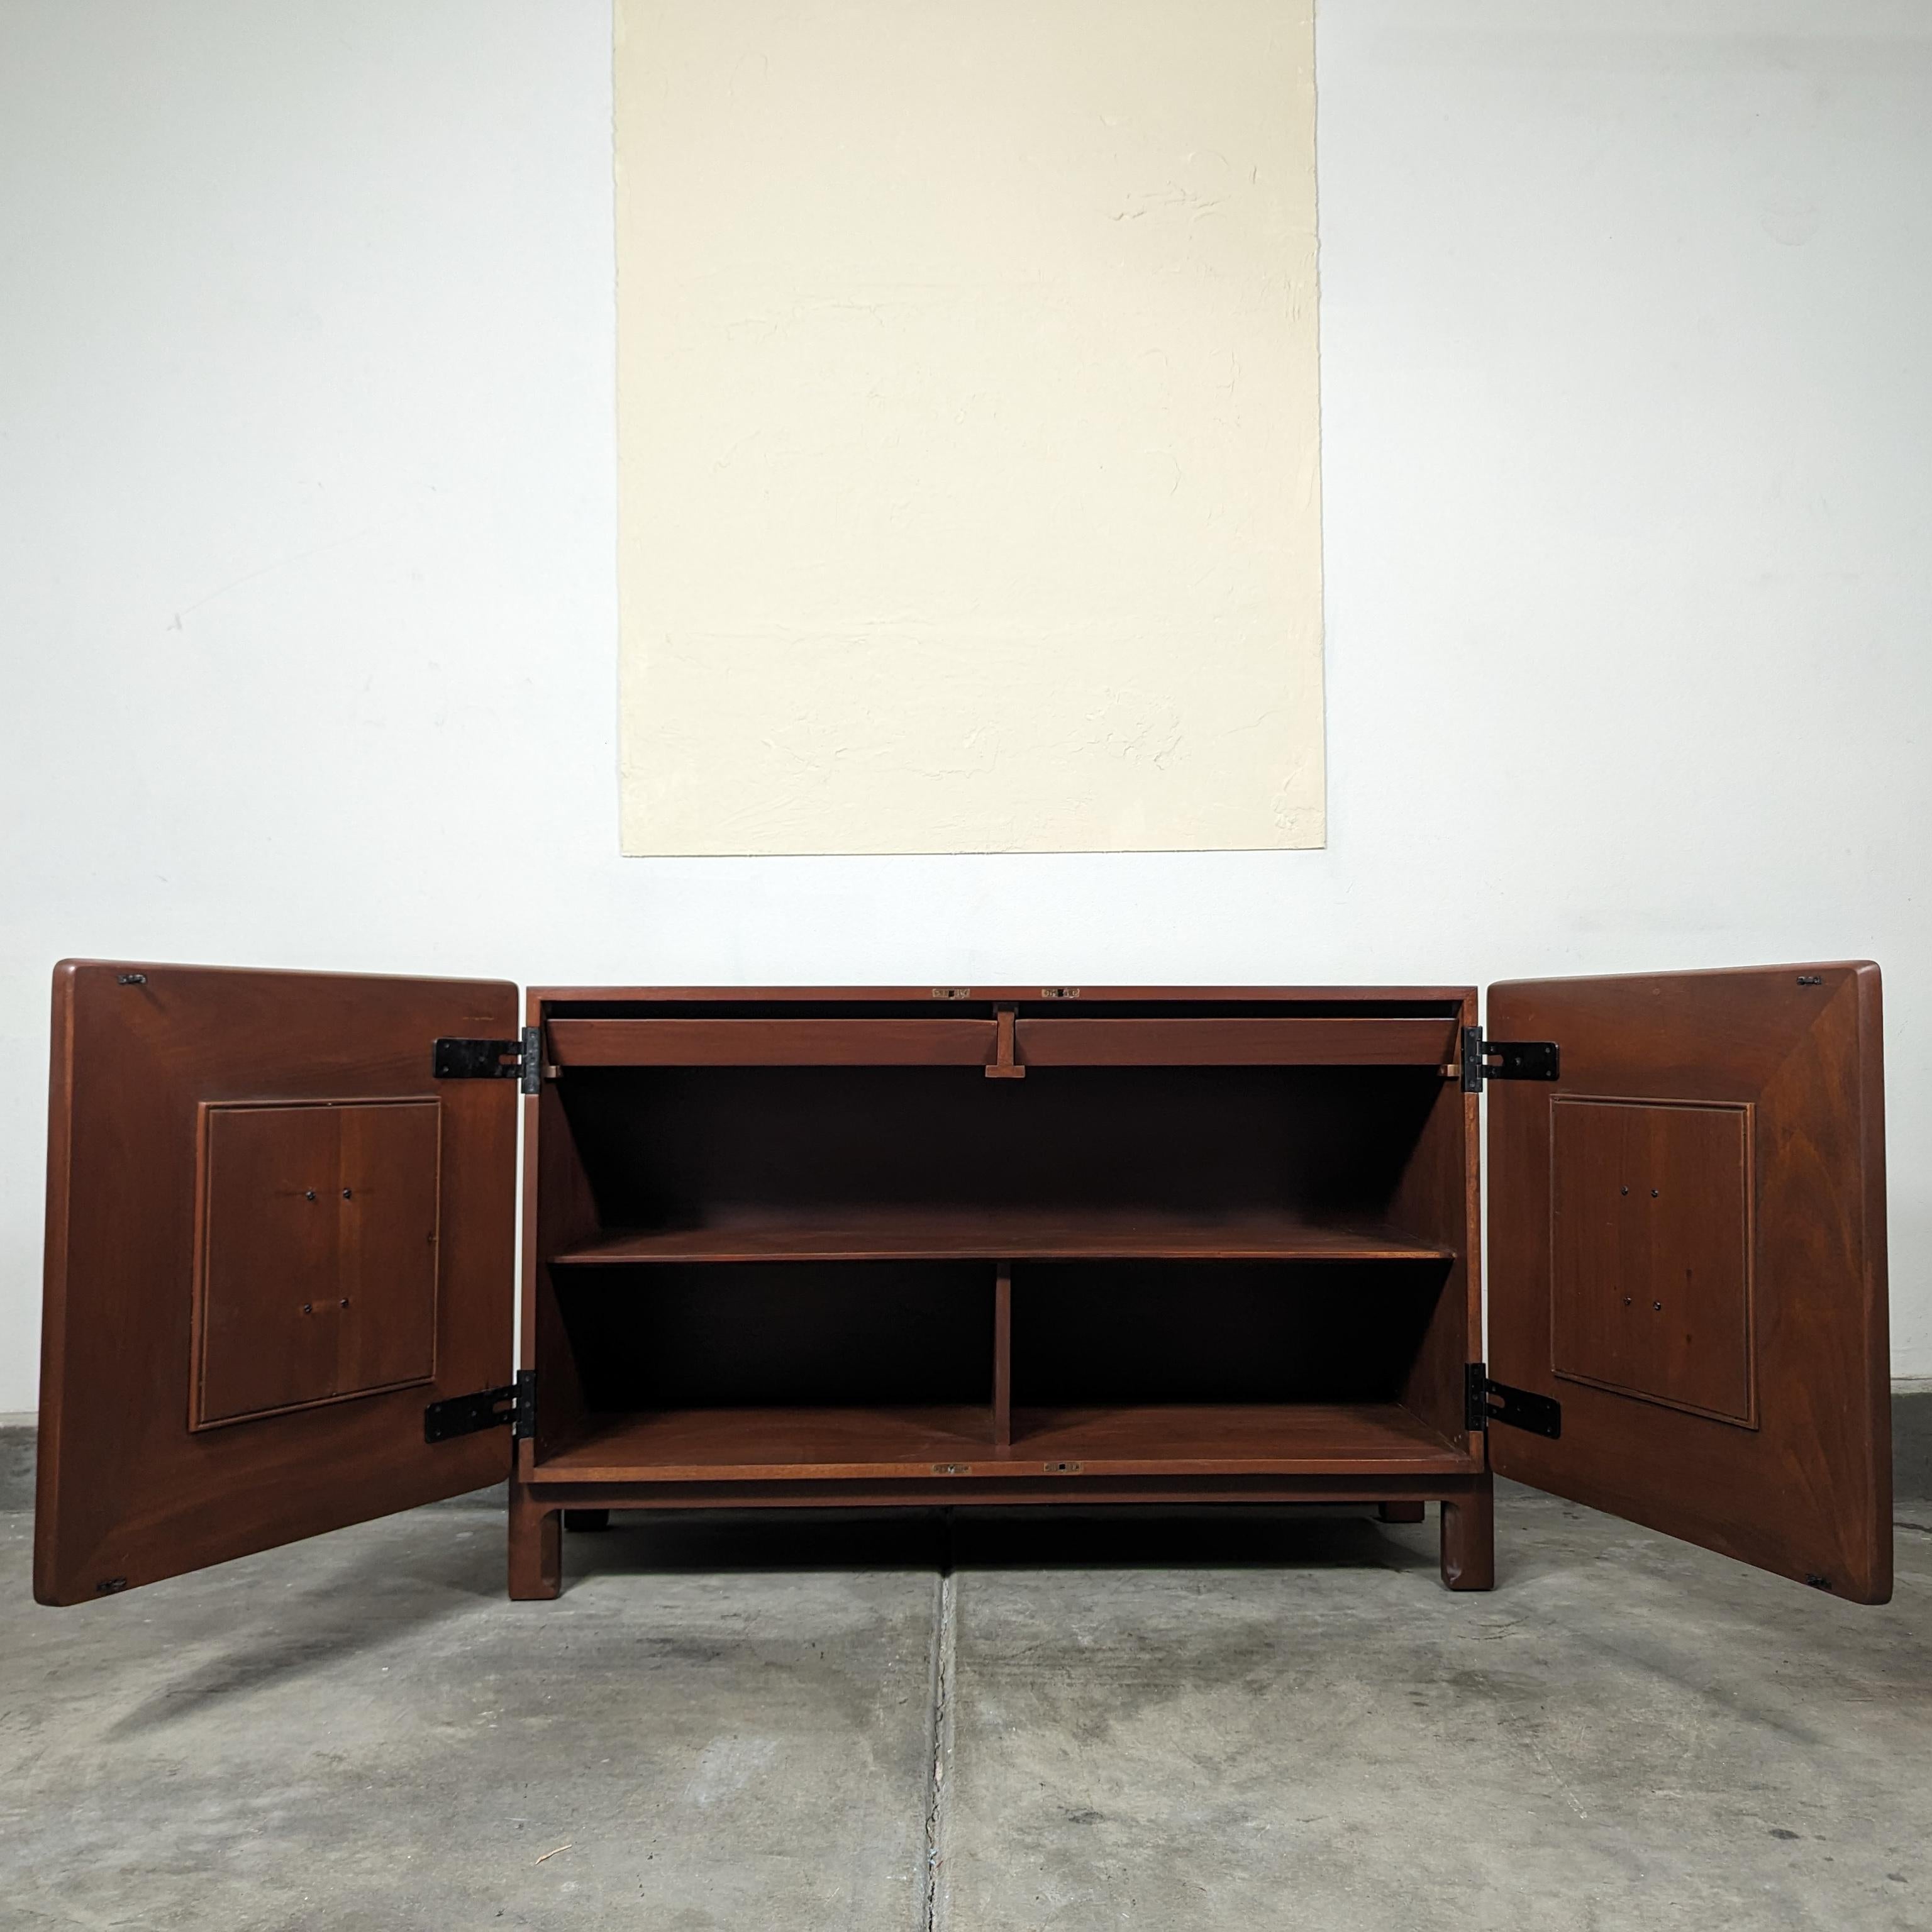 Mexican Mid Century Cabinet Designed by Edmond J. Spence for Industria Mueblera, c1950s